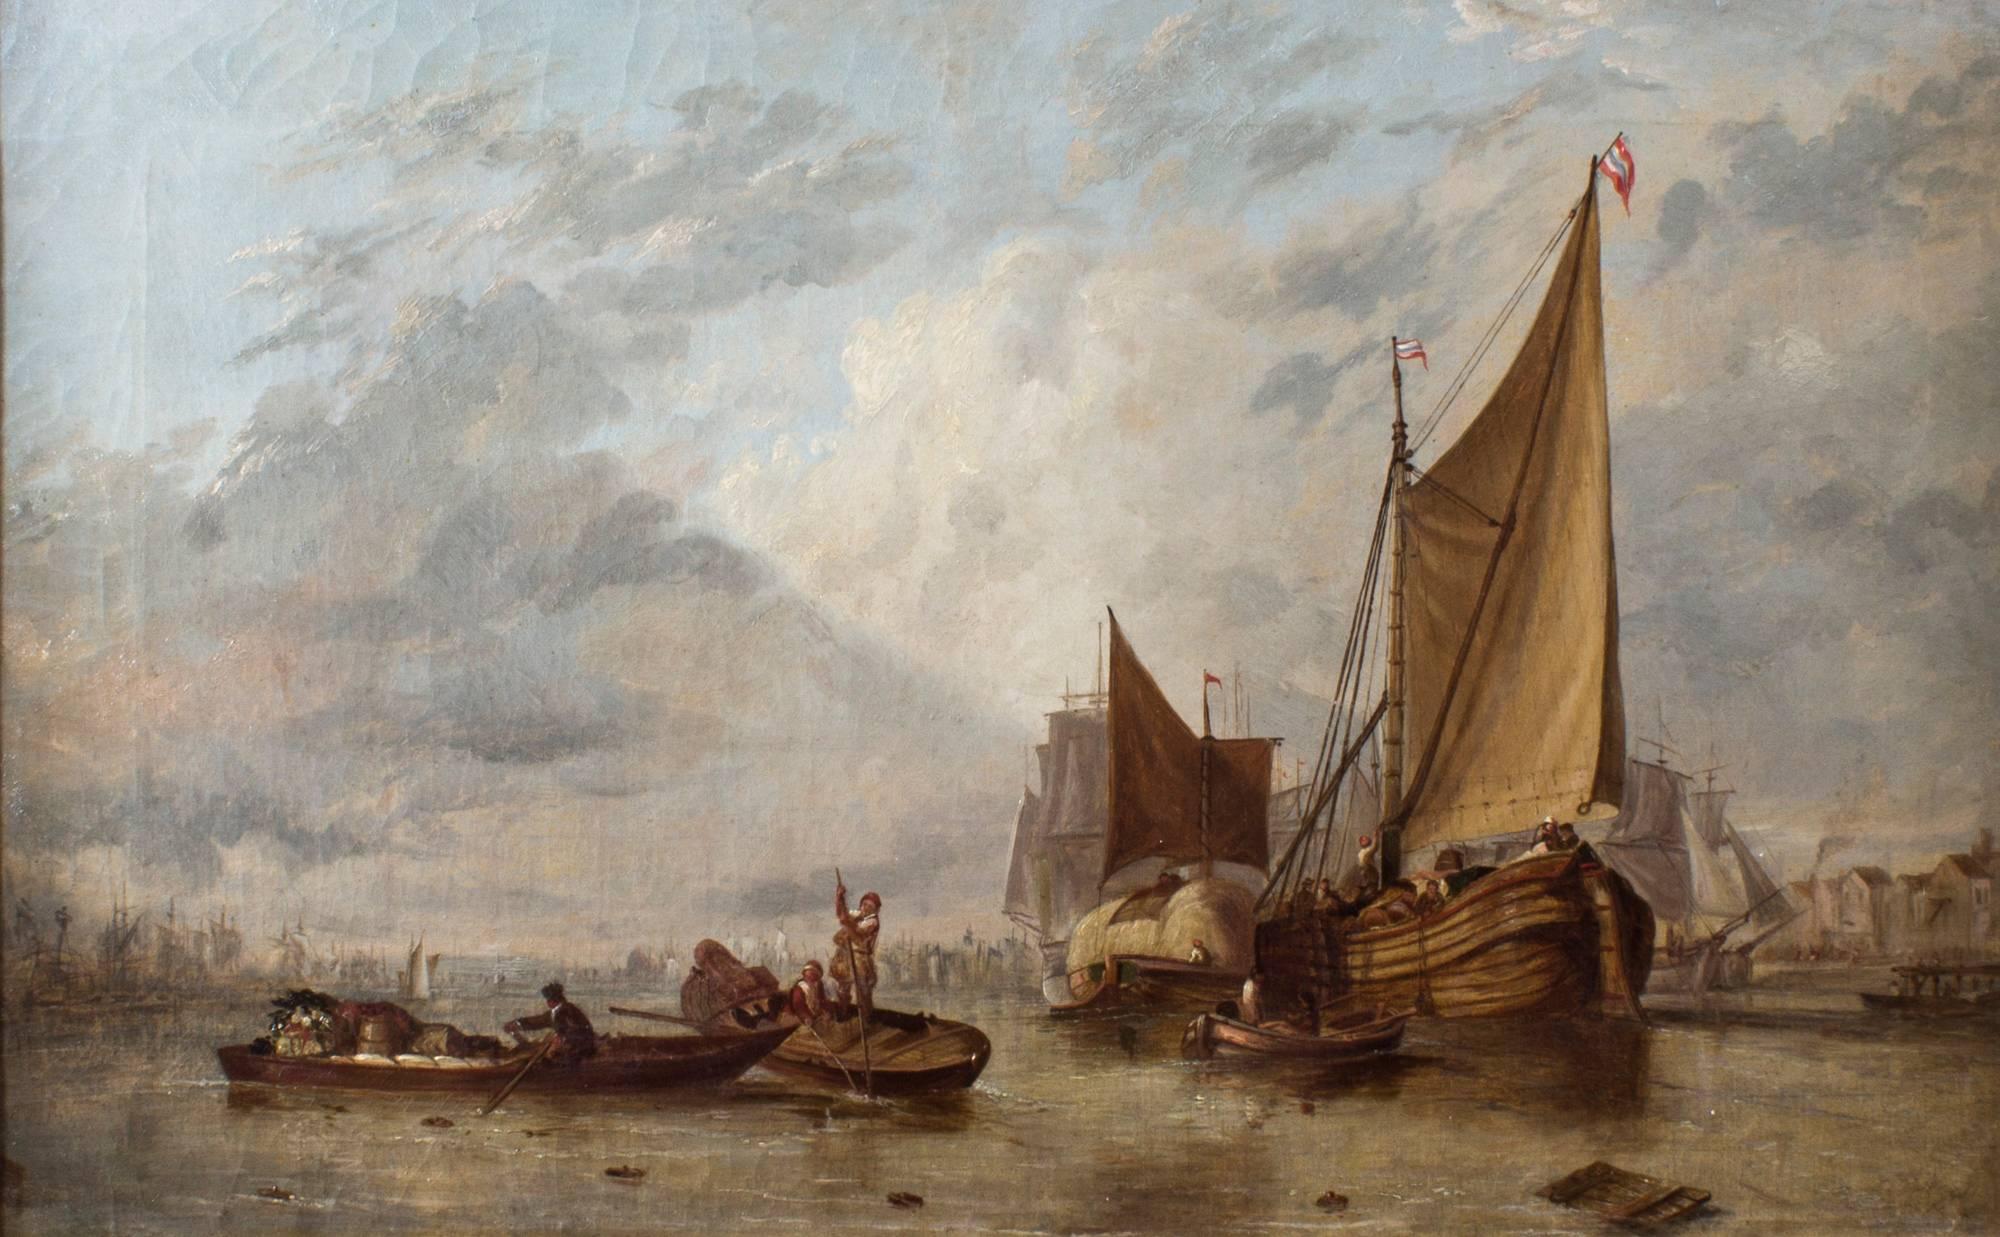 This is a beautiful Dutch antique oil on canvas seascape painting of boats on an estuary, circle of Hermans Koekkoek, circa 1860.

This painting features cloudy skies with cargo ships being unloaded with a town in the distance.

The colors are